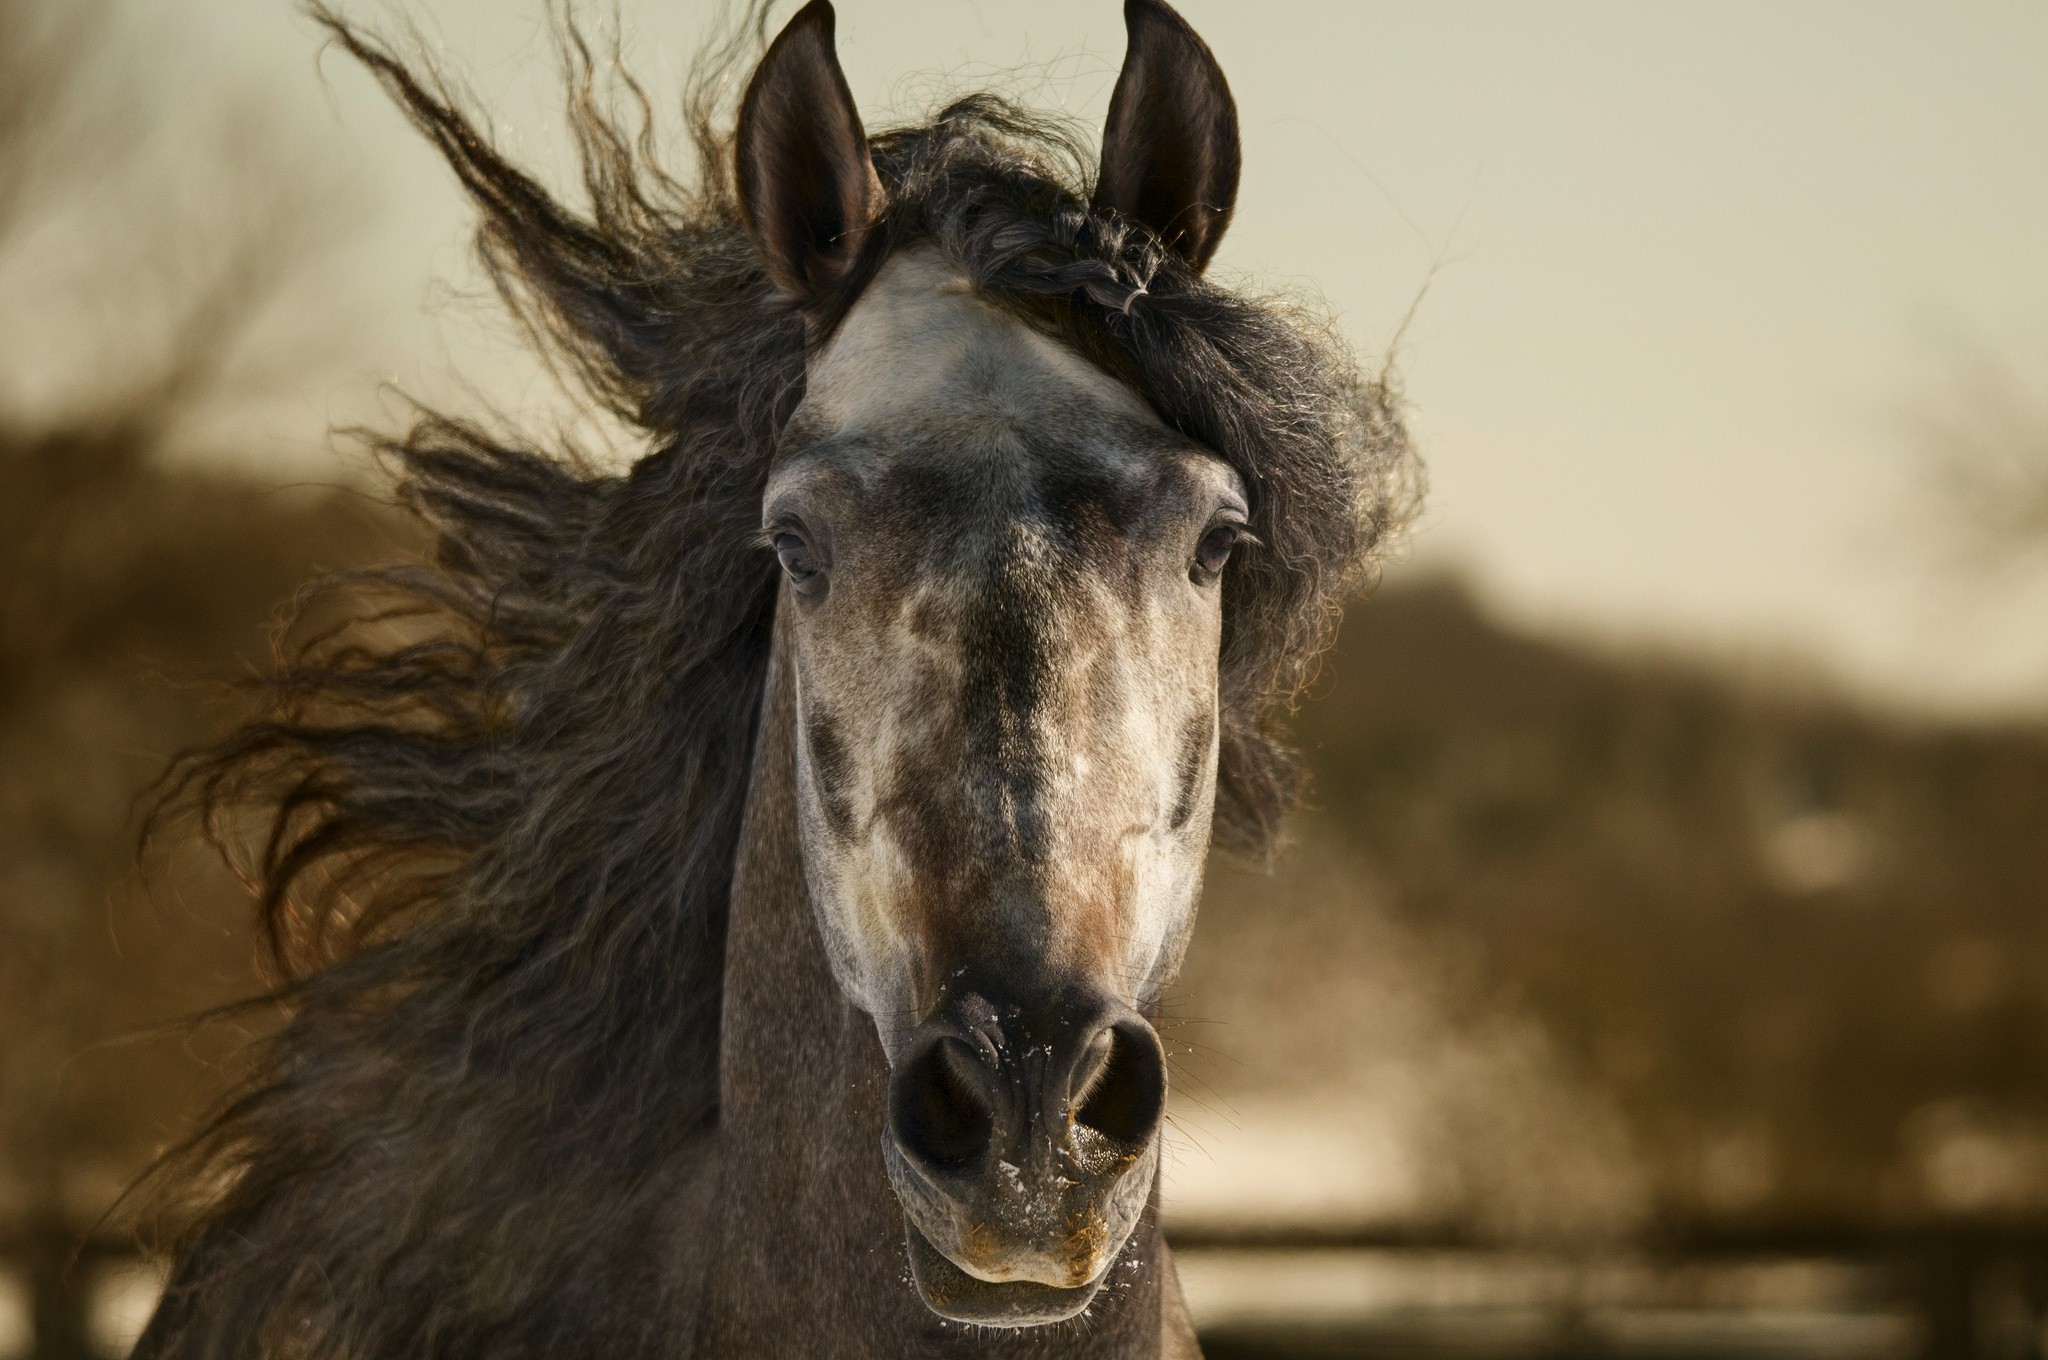 General 2048x1360 animals horse outdoors blurred frontal view closeup